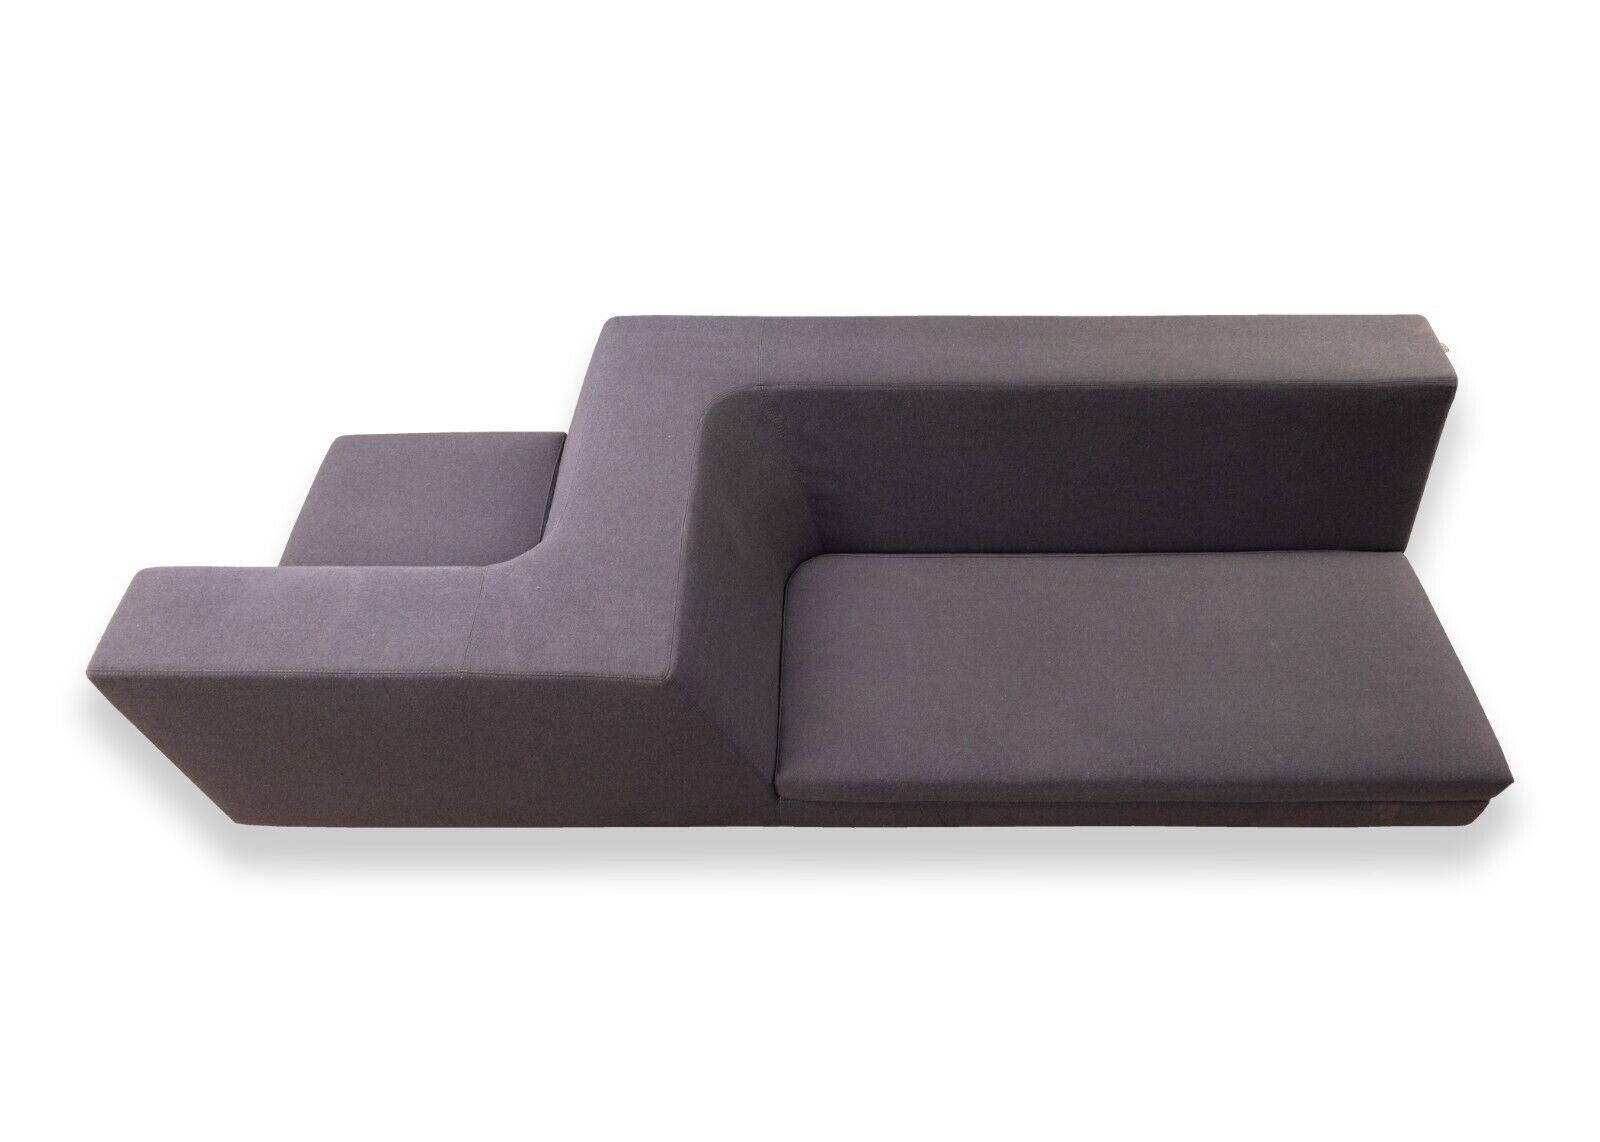 Contemporary Pair of Victory Left and Right Hand Sofas by Cory Grosser for Frighetto Italian